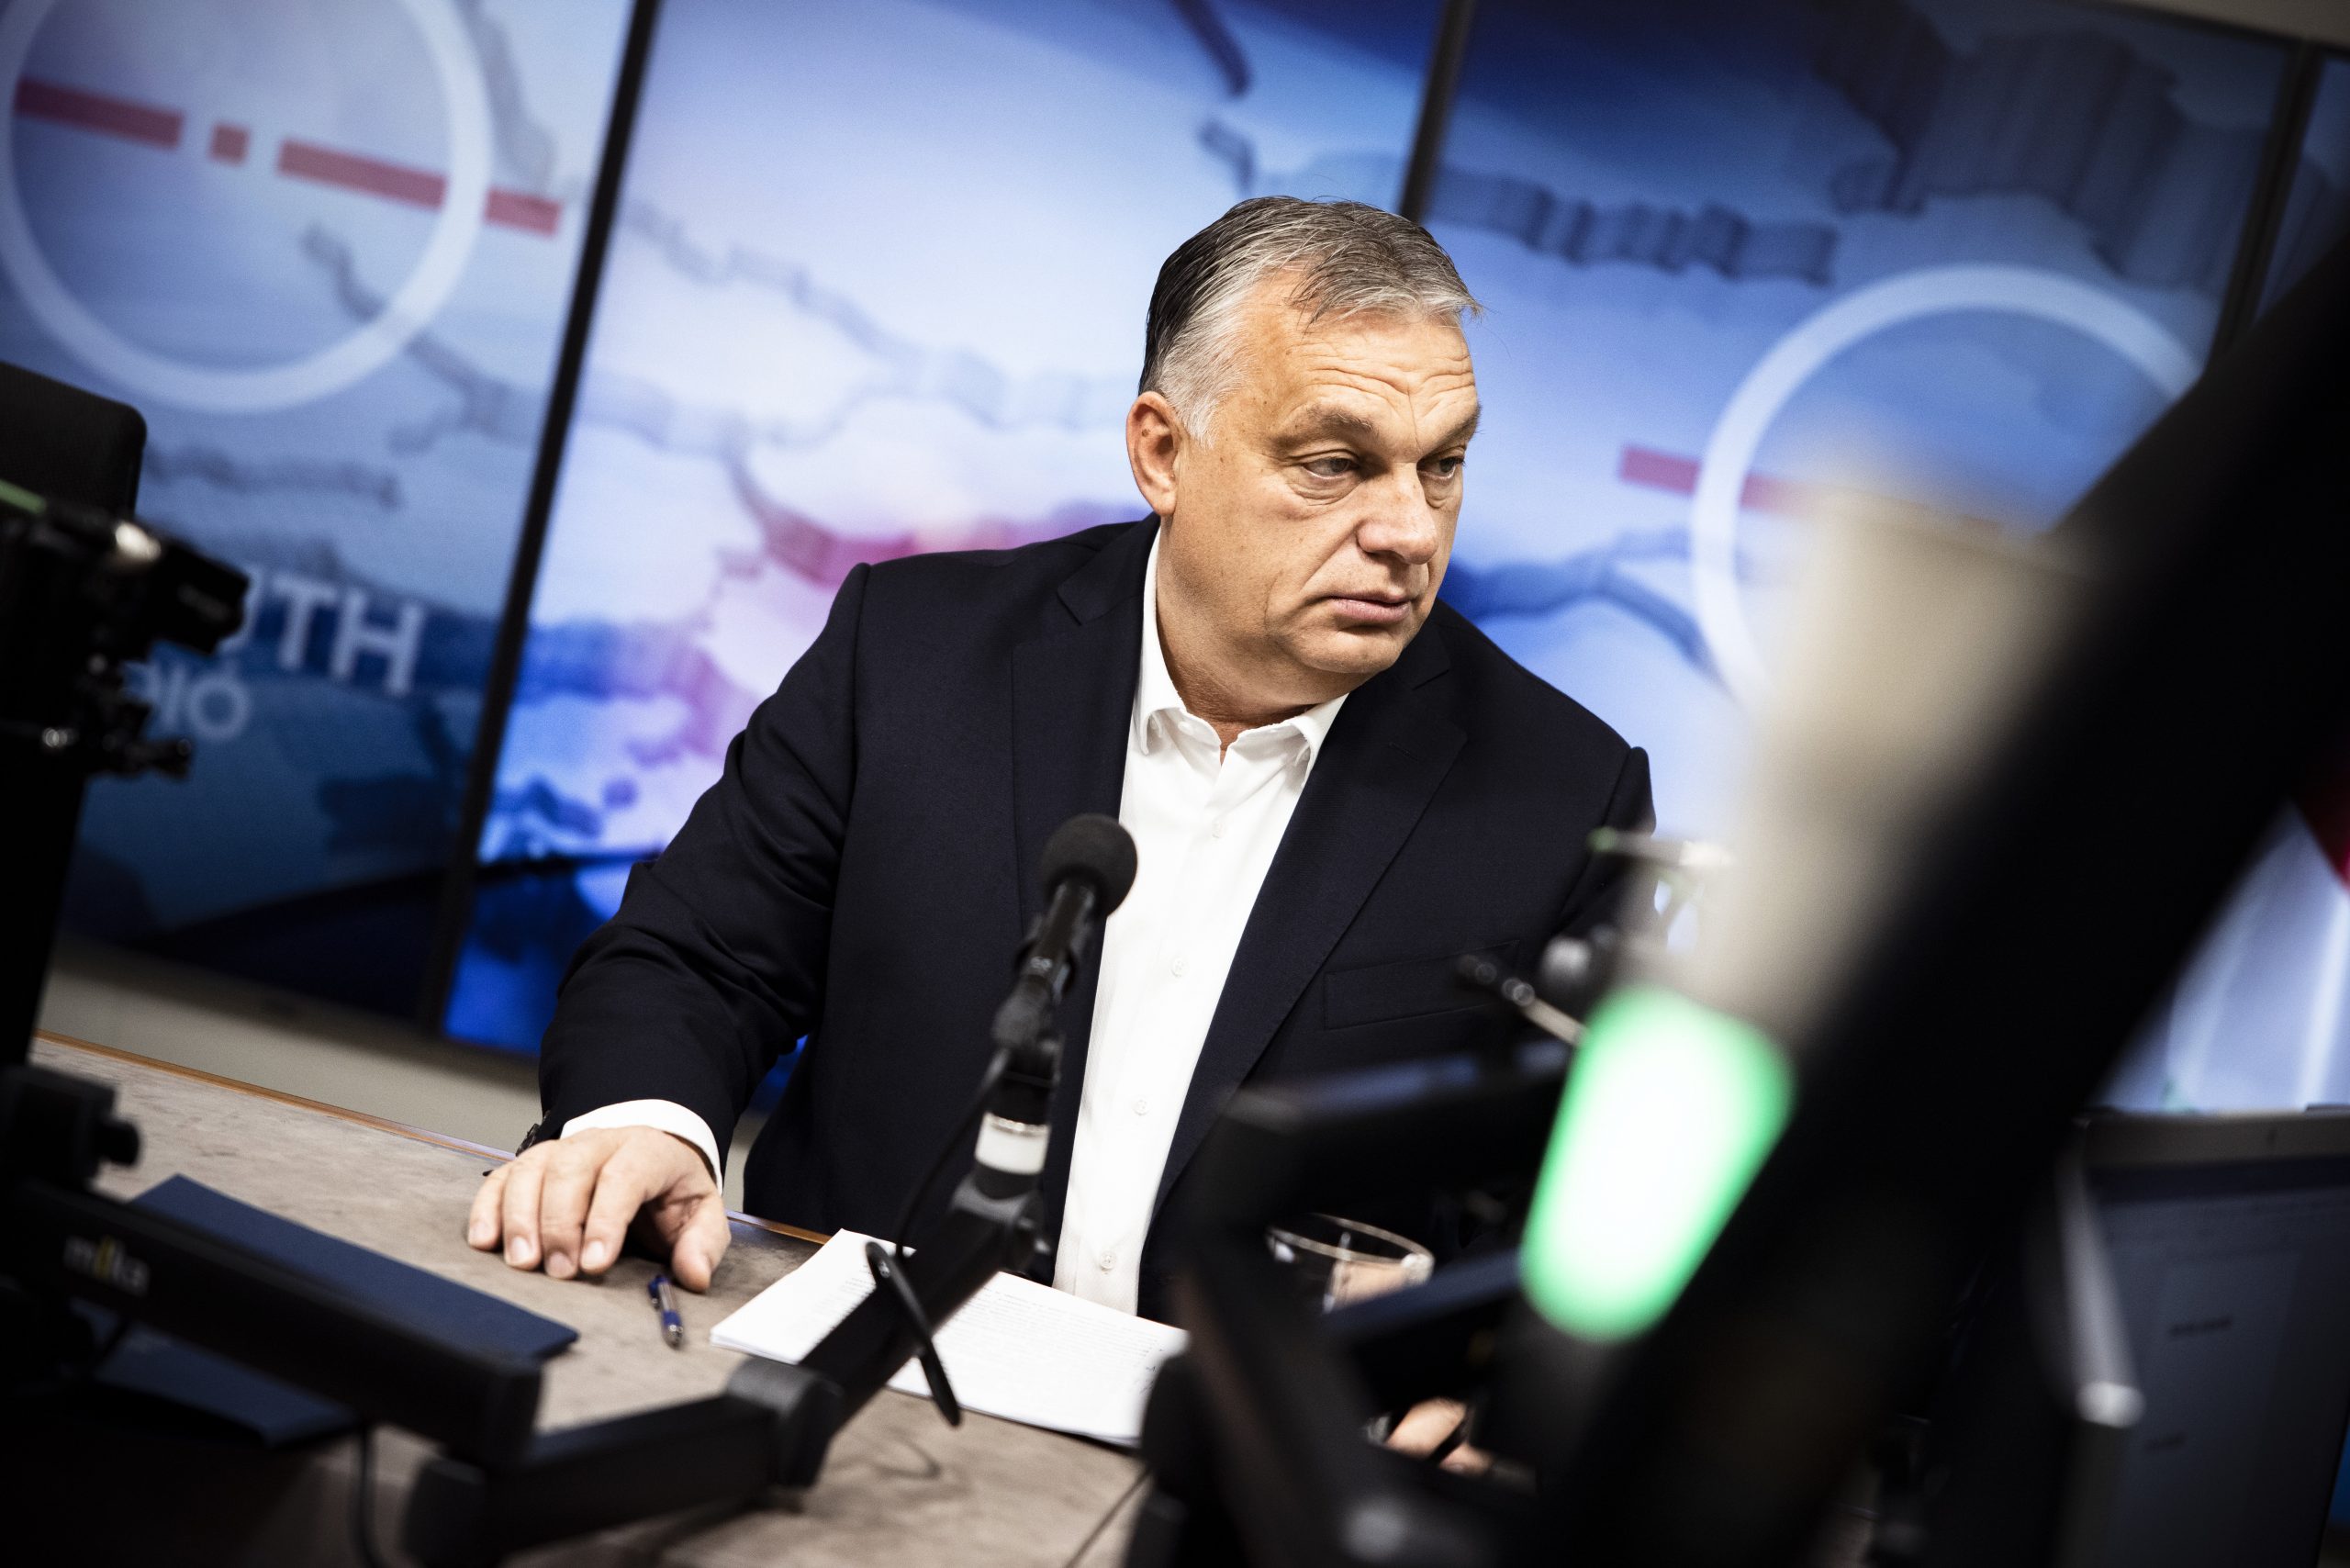 PM Orbán: Brussels 'Trying to Intervene' in 2022 General Election